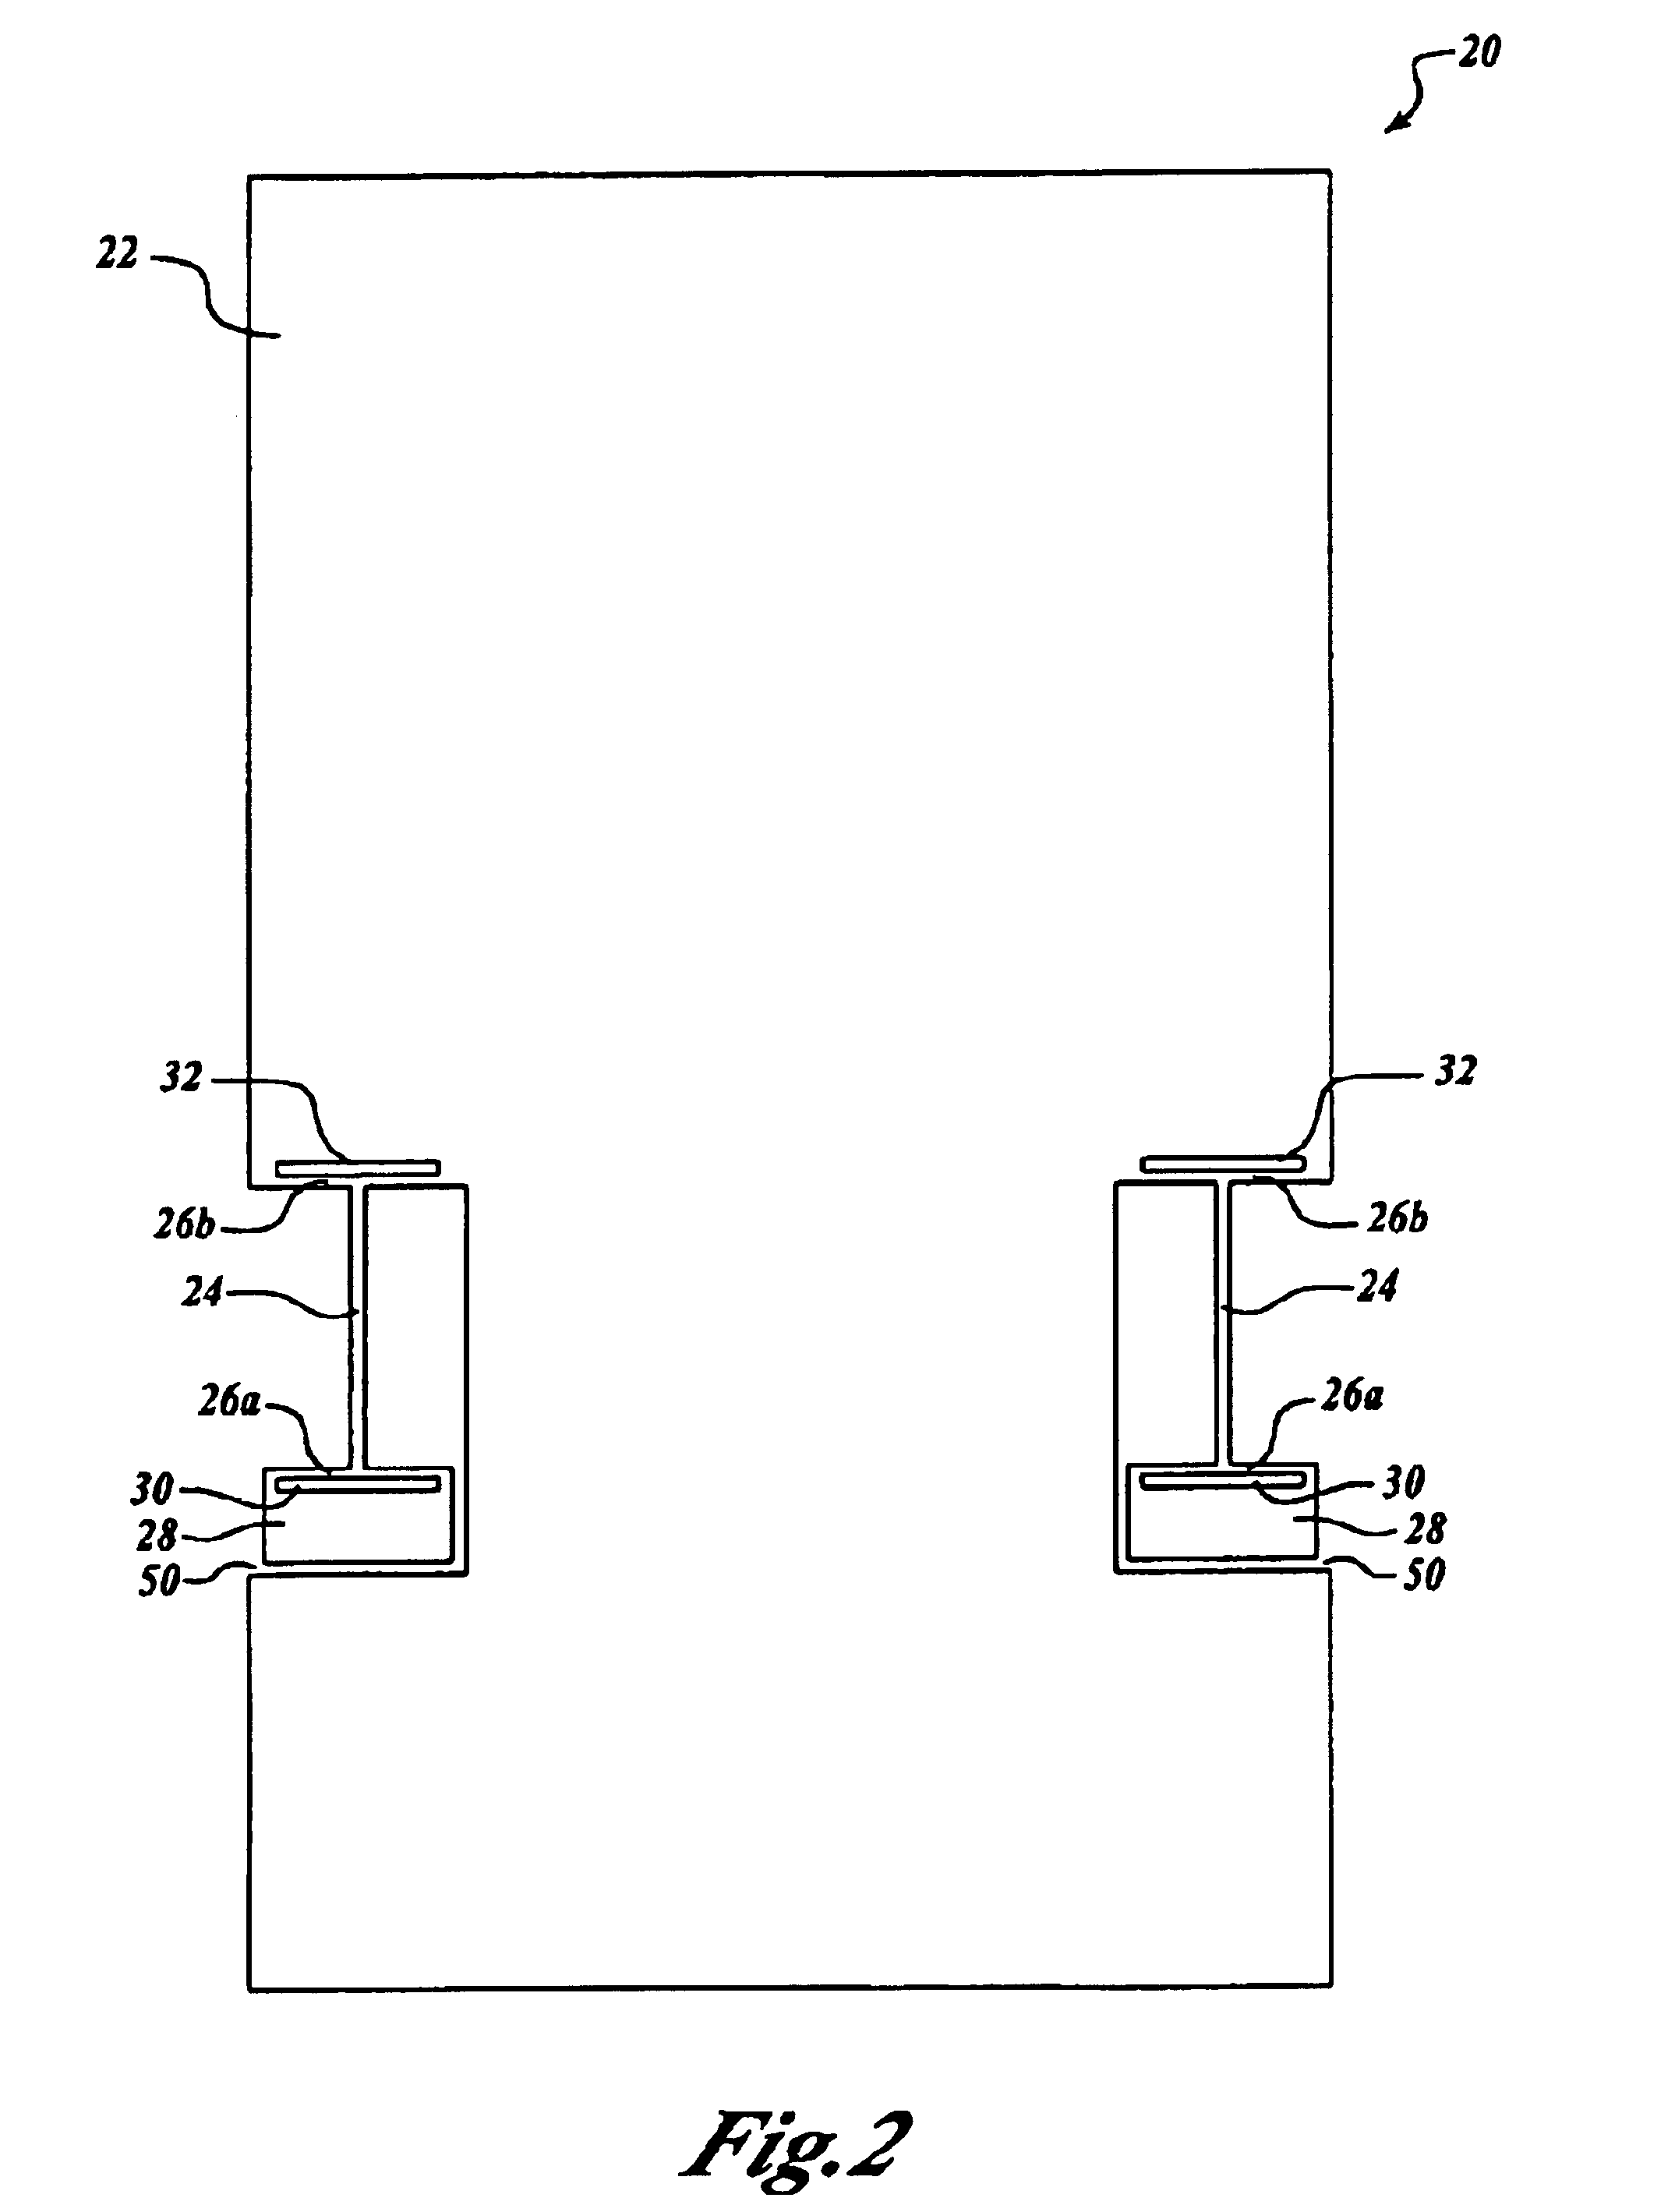 Bending beam accelerometer with differential capacitive pickoff